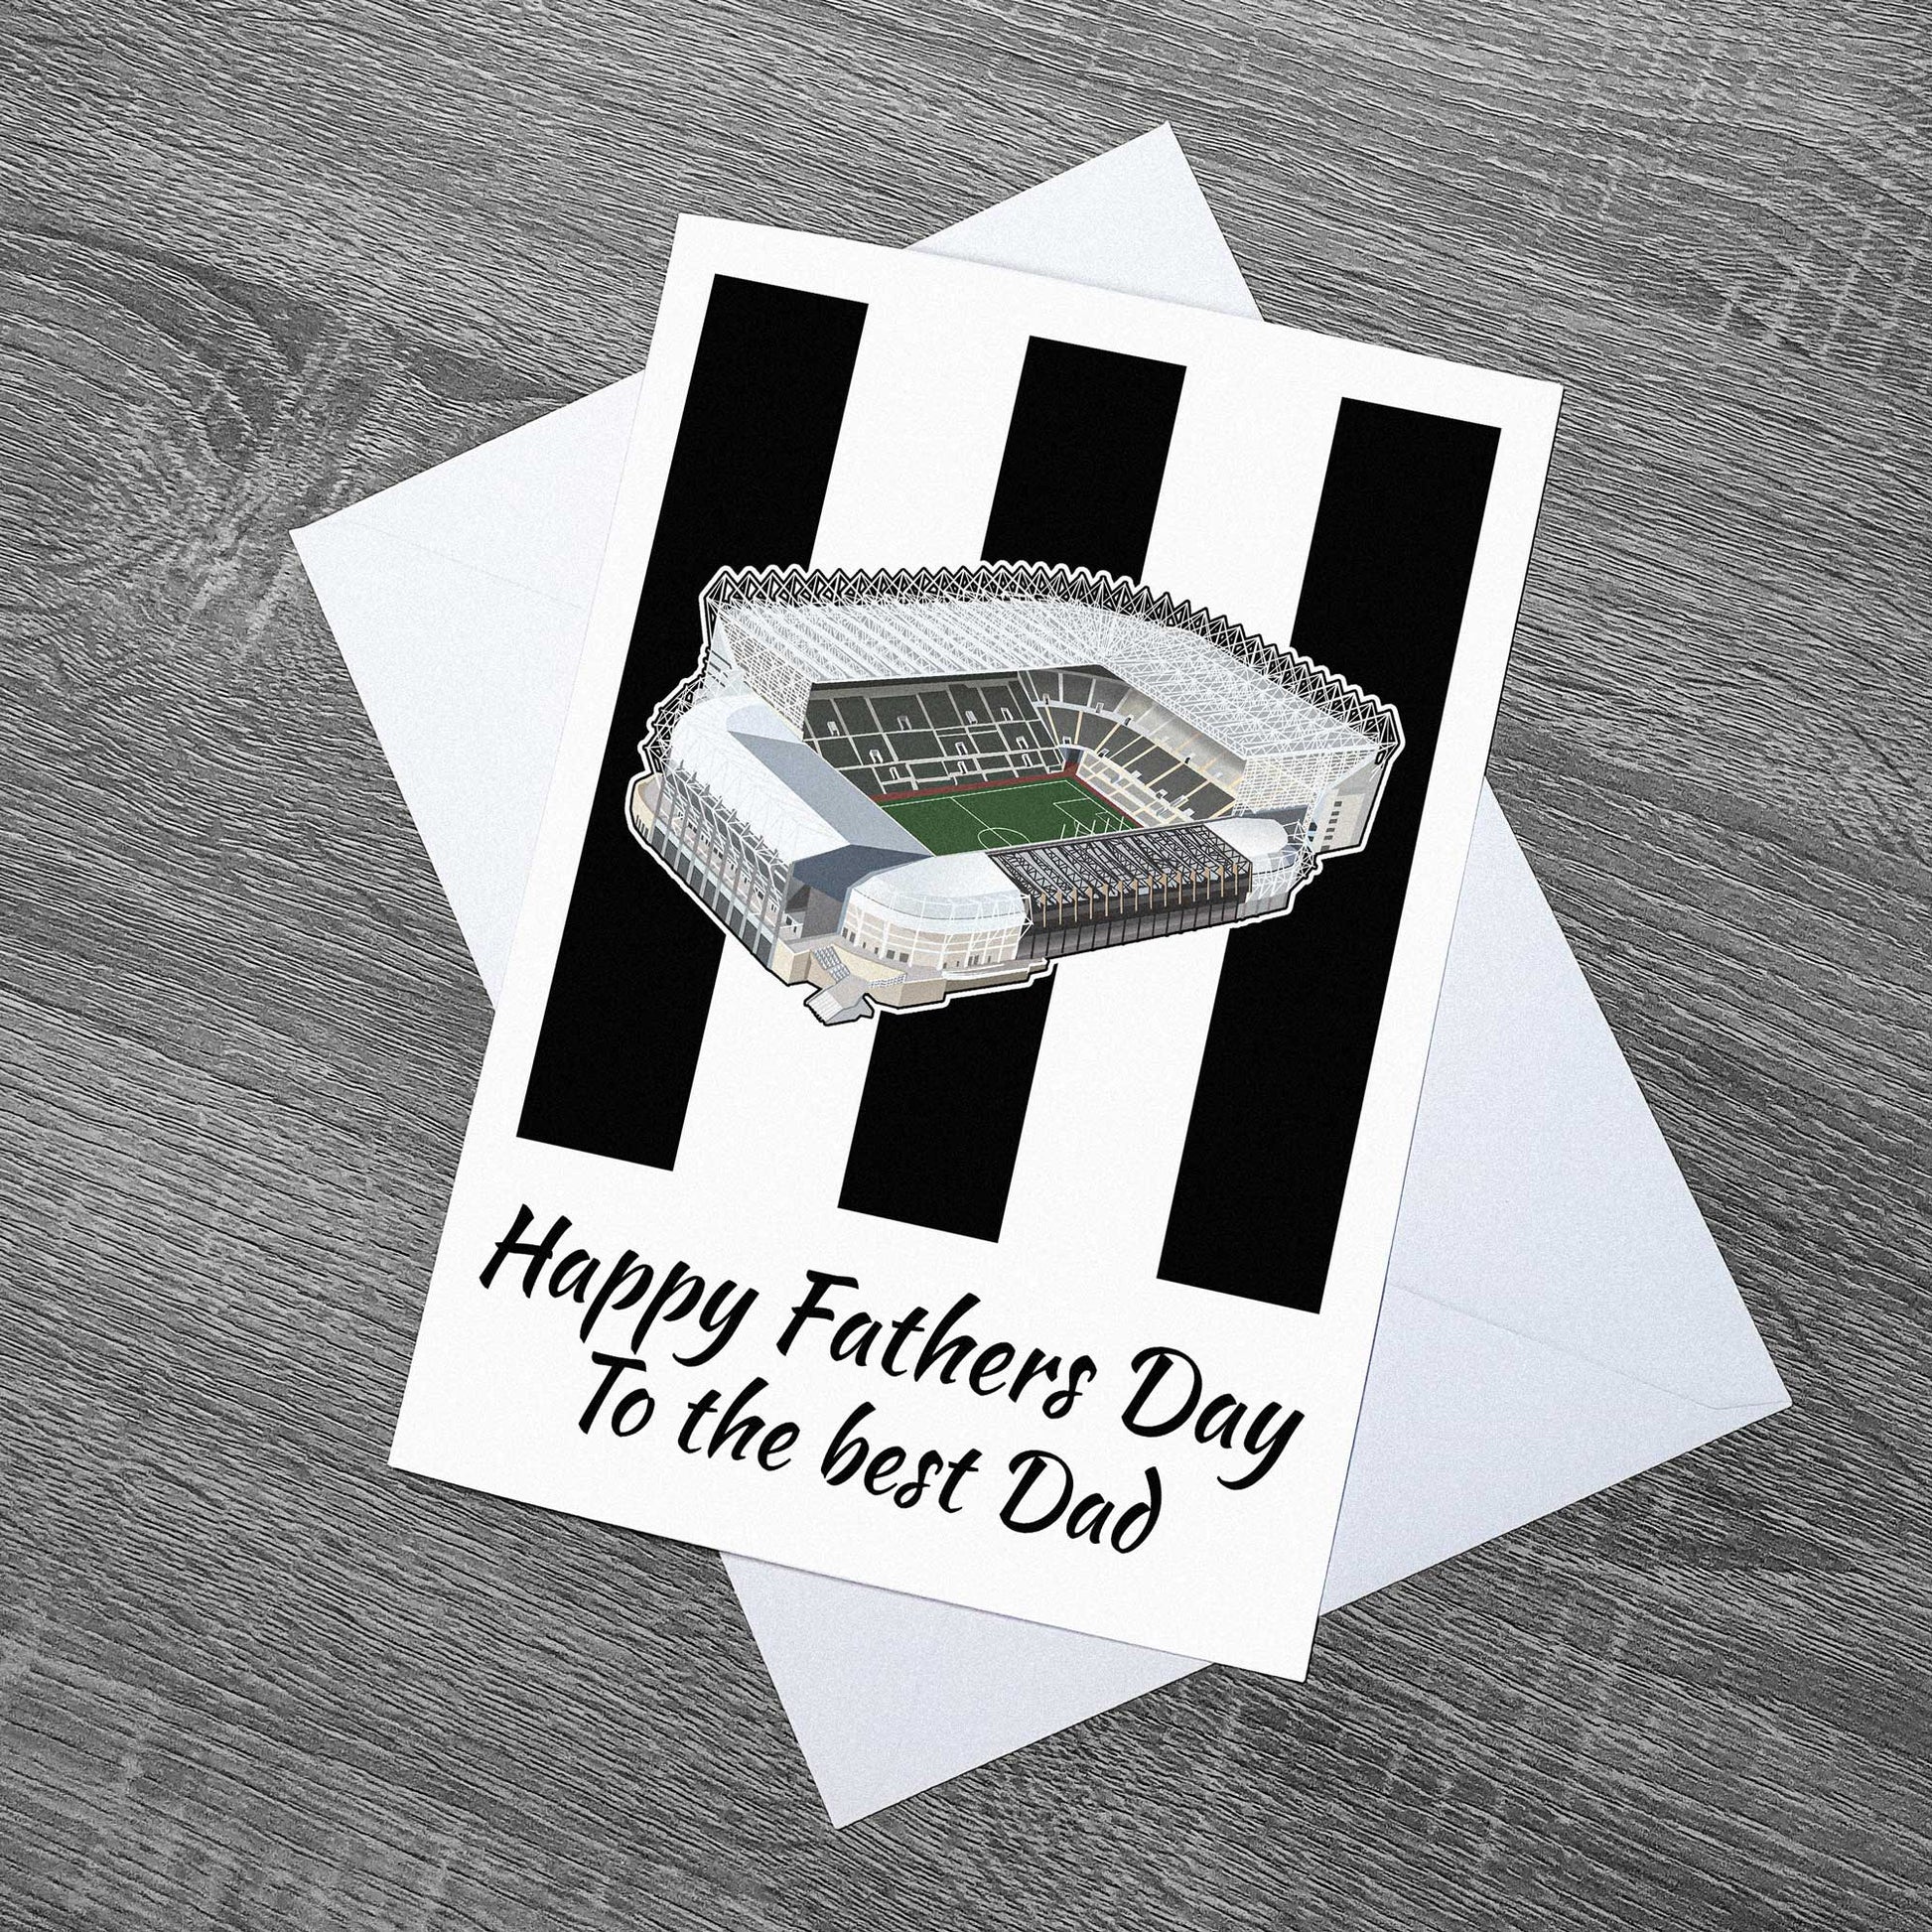 Inspired by the home of Newcastle United Football Club, St James' Park. Fathers day card